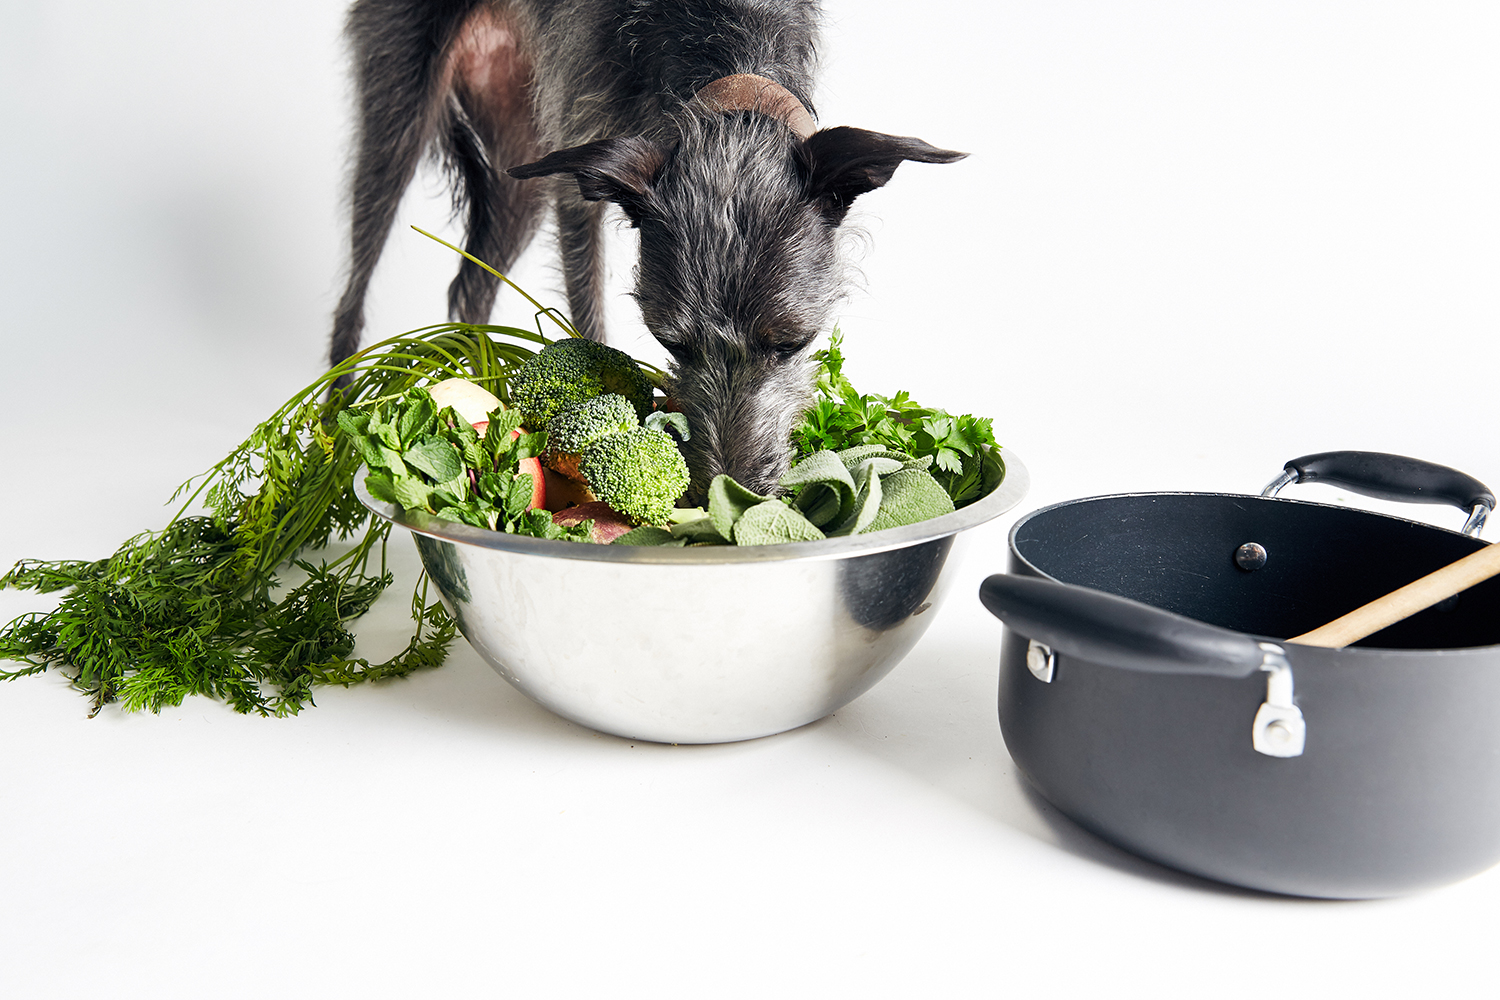 What Is The Best Diet For Dogs?